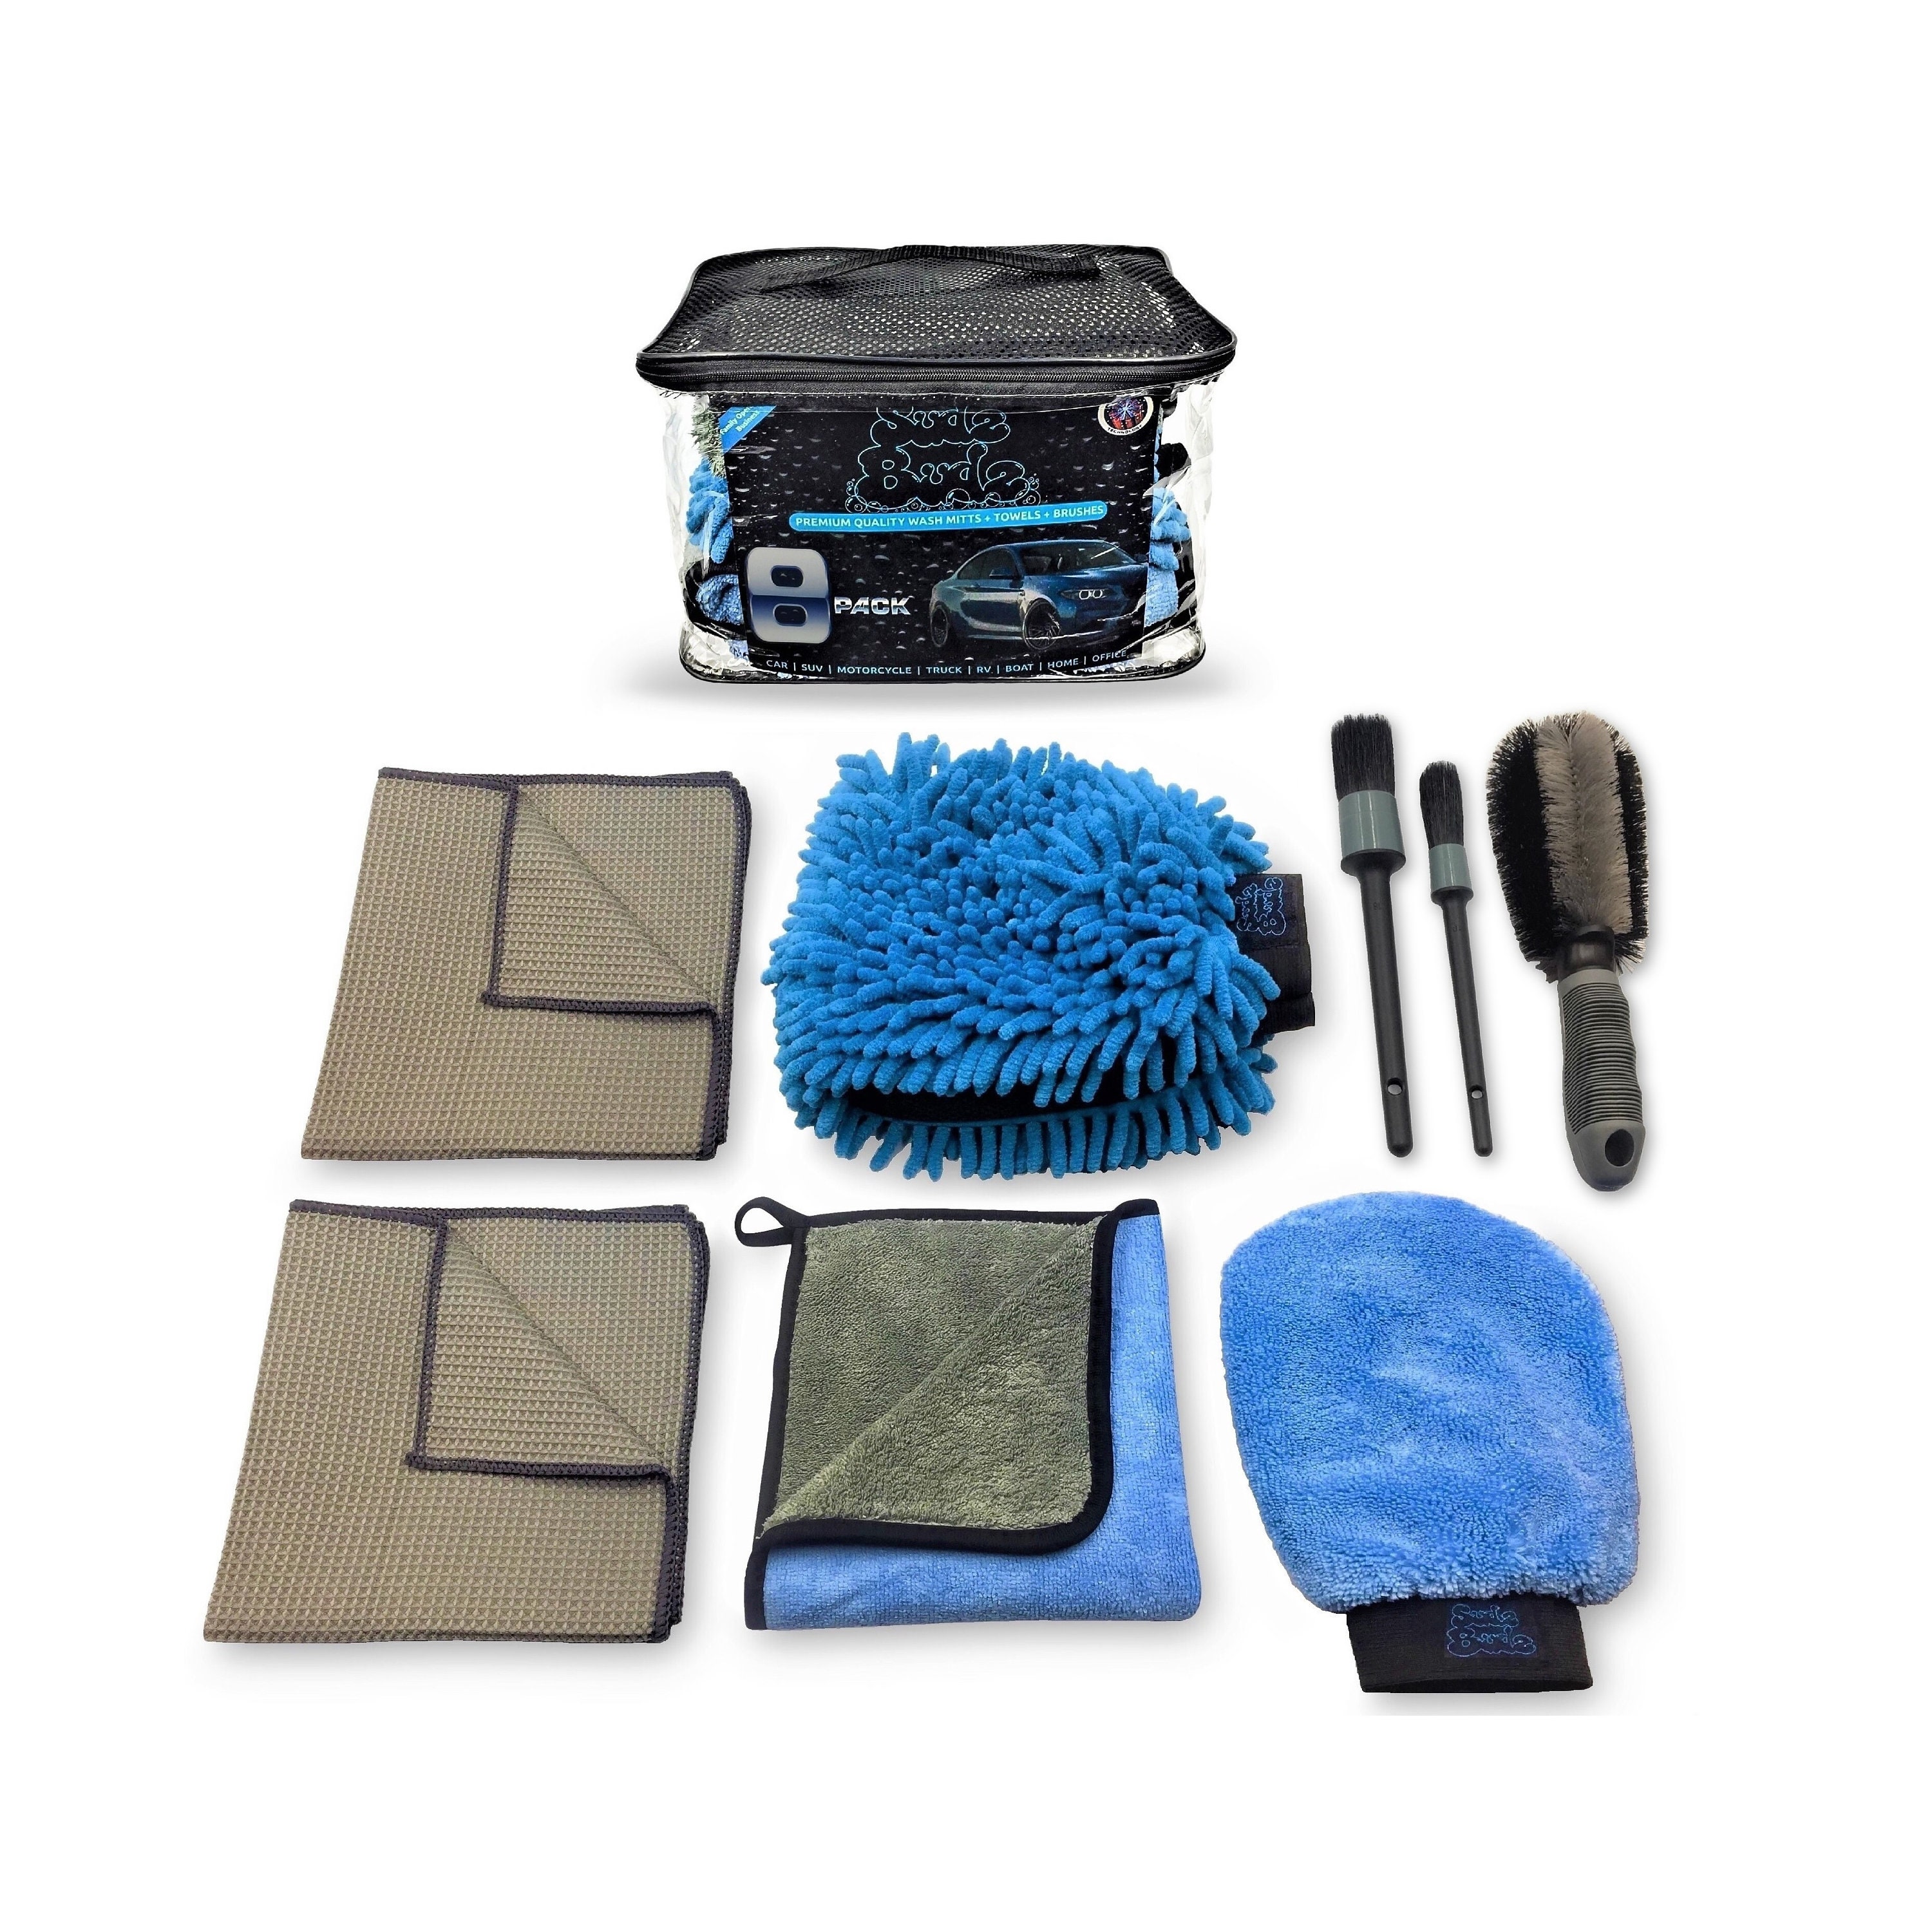  Car Detailing Kit (18pc) - Car Cleaning Kit - Car Wash Kit -  Complete Car Wash Kit with Bucket For Perfect Car Wash, Car Gifts for Men,  Gifts for Car Guys